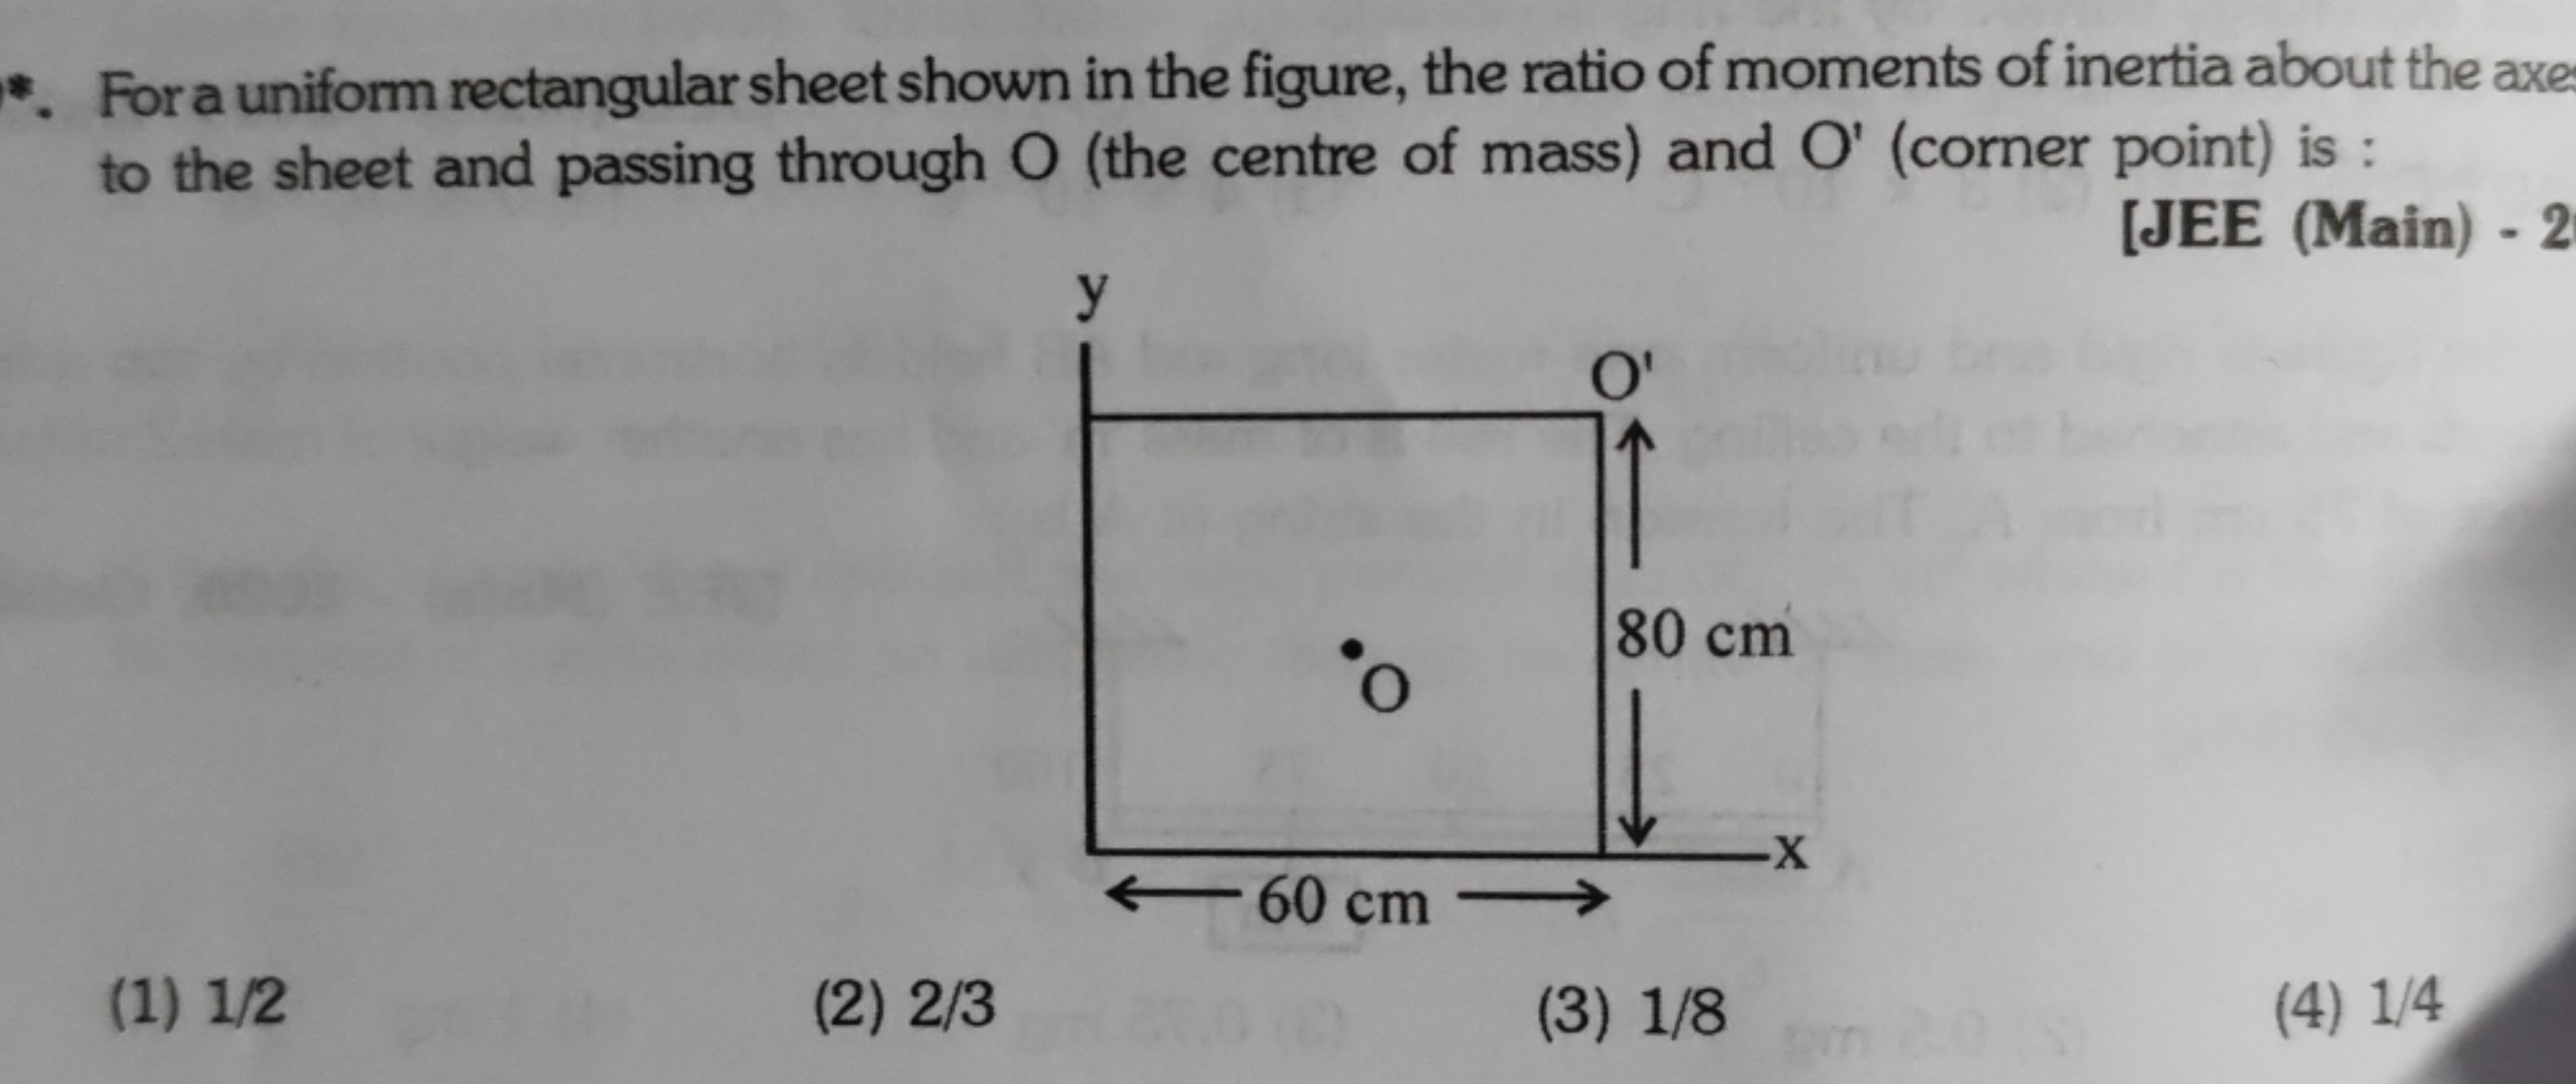 For a uniform rectangular sheet shown in the figure, the ratio of mome